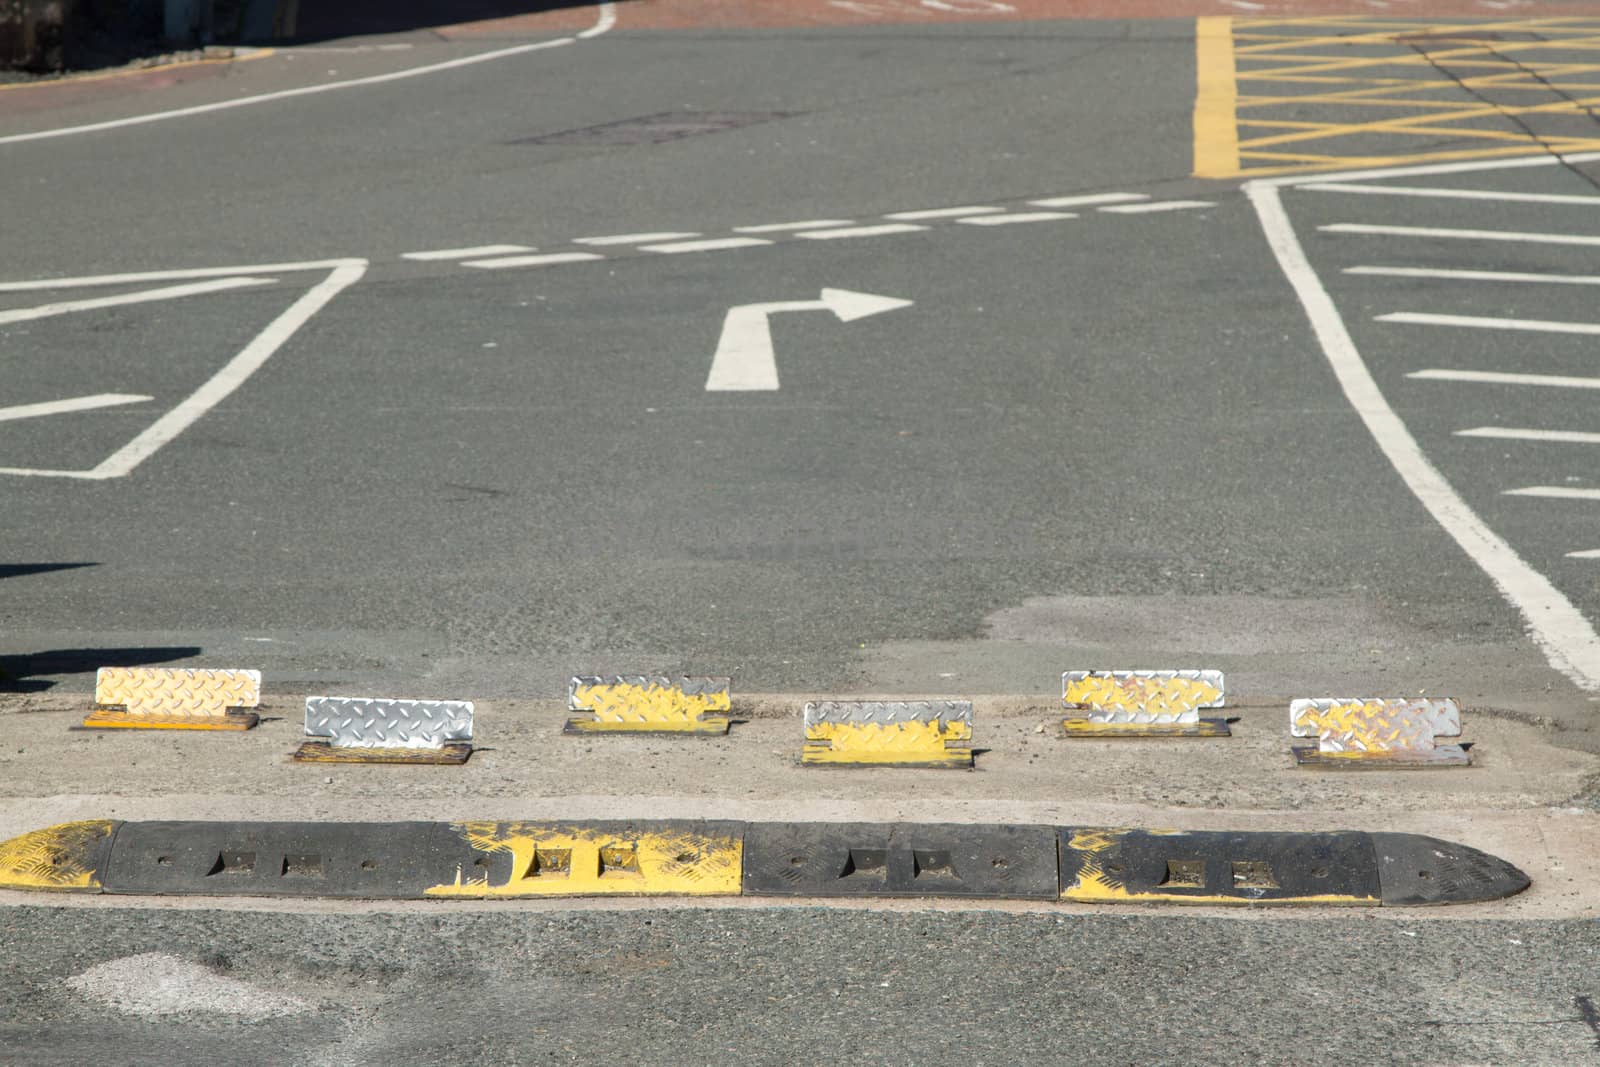 An exit with rumble strip, metal security blocks leading to a road with give way markings, a turn right arrow and various grid markings.